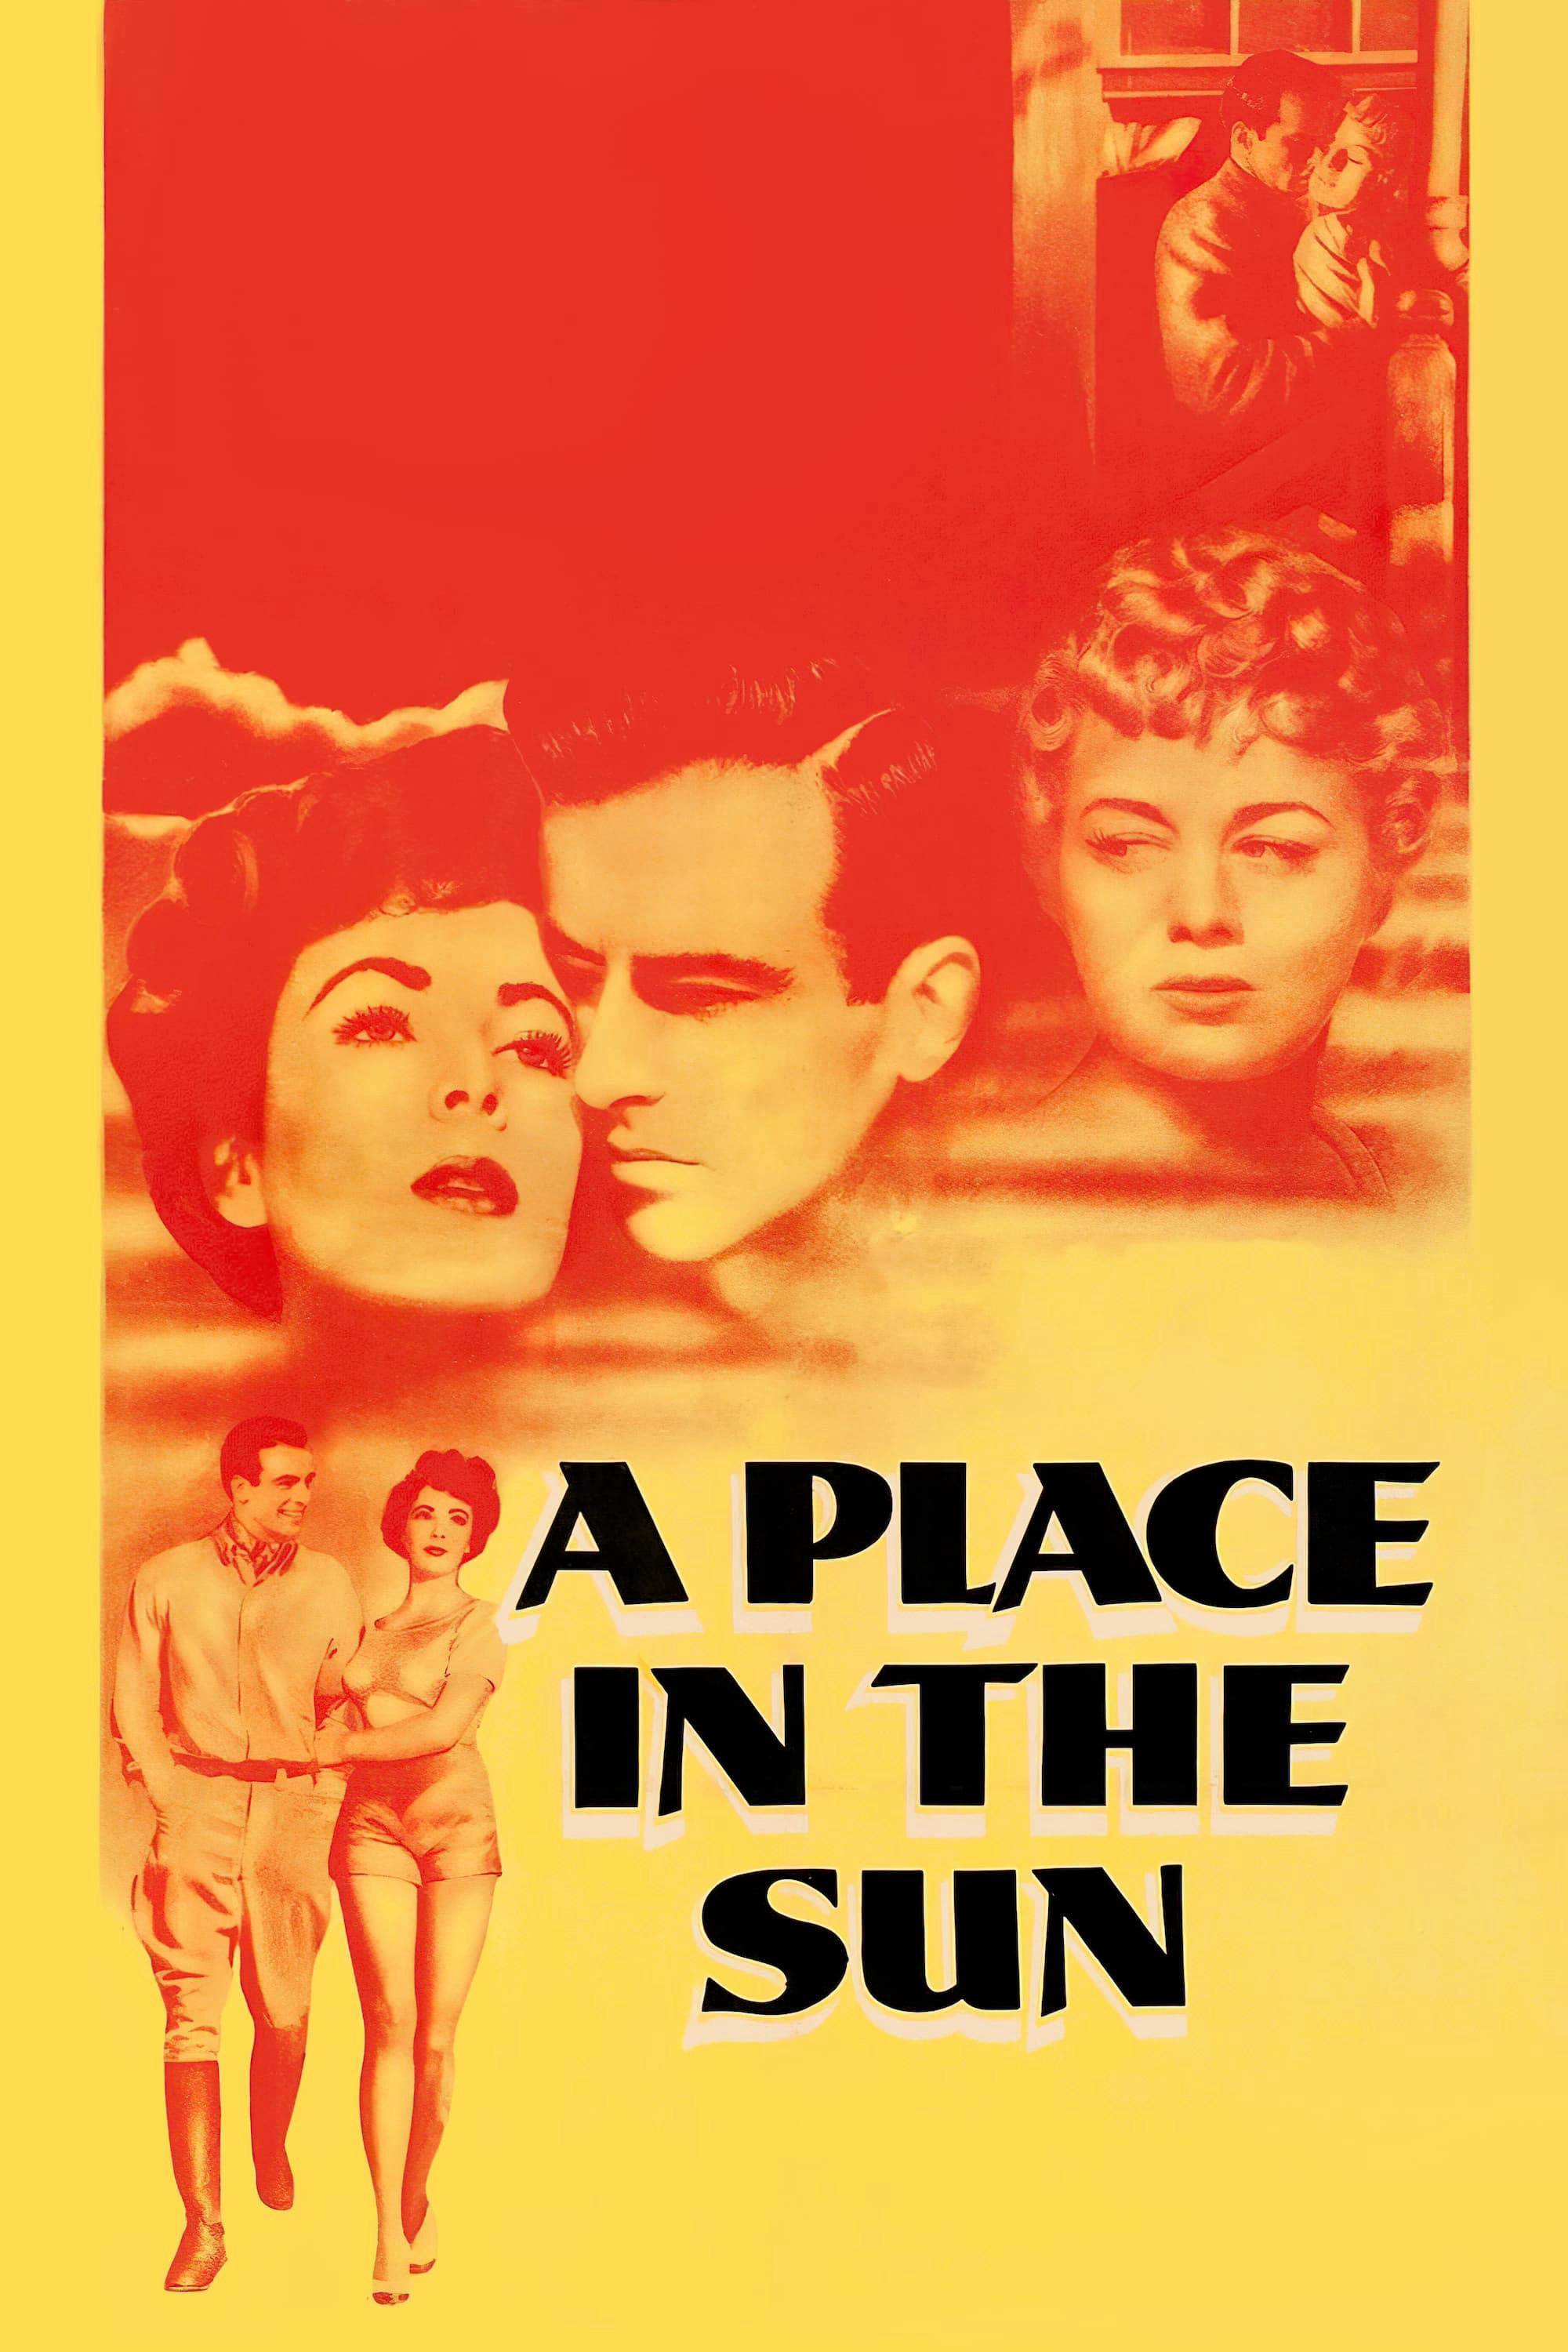 A Place in the Sun - A Place in the Sun